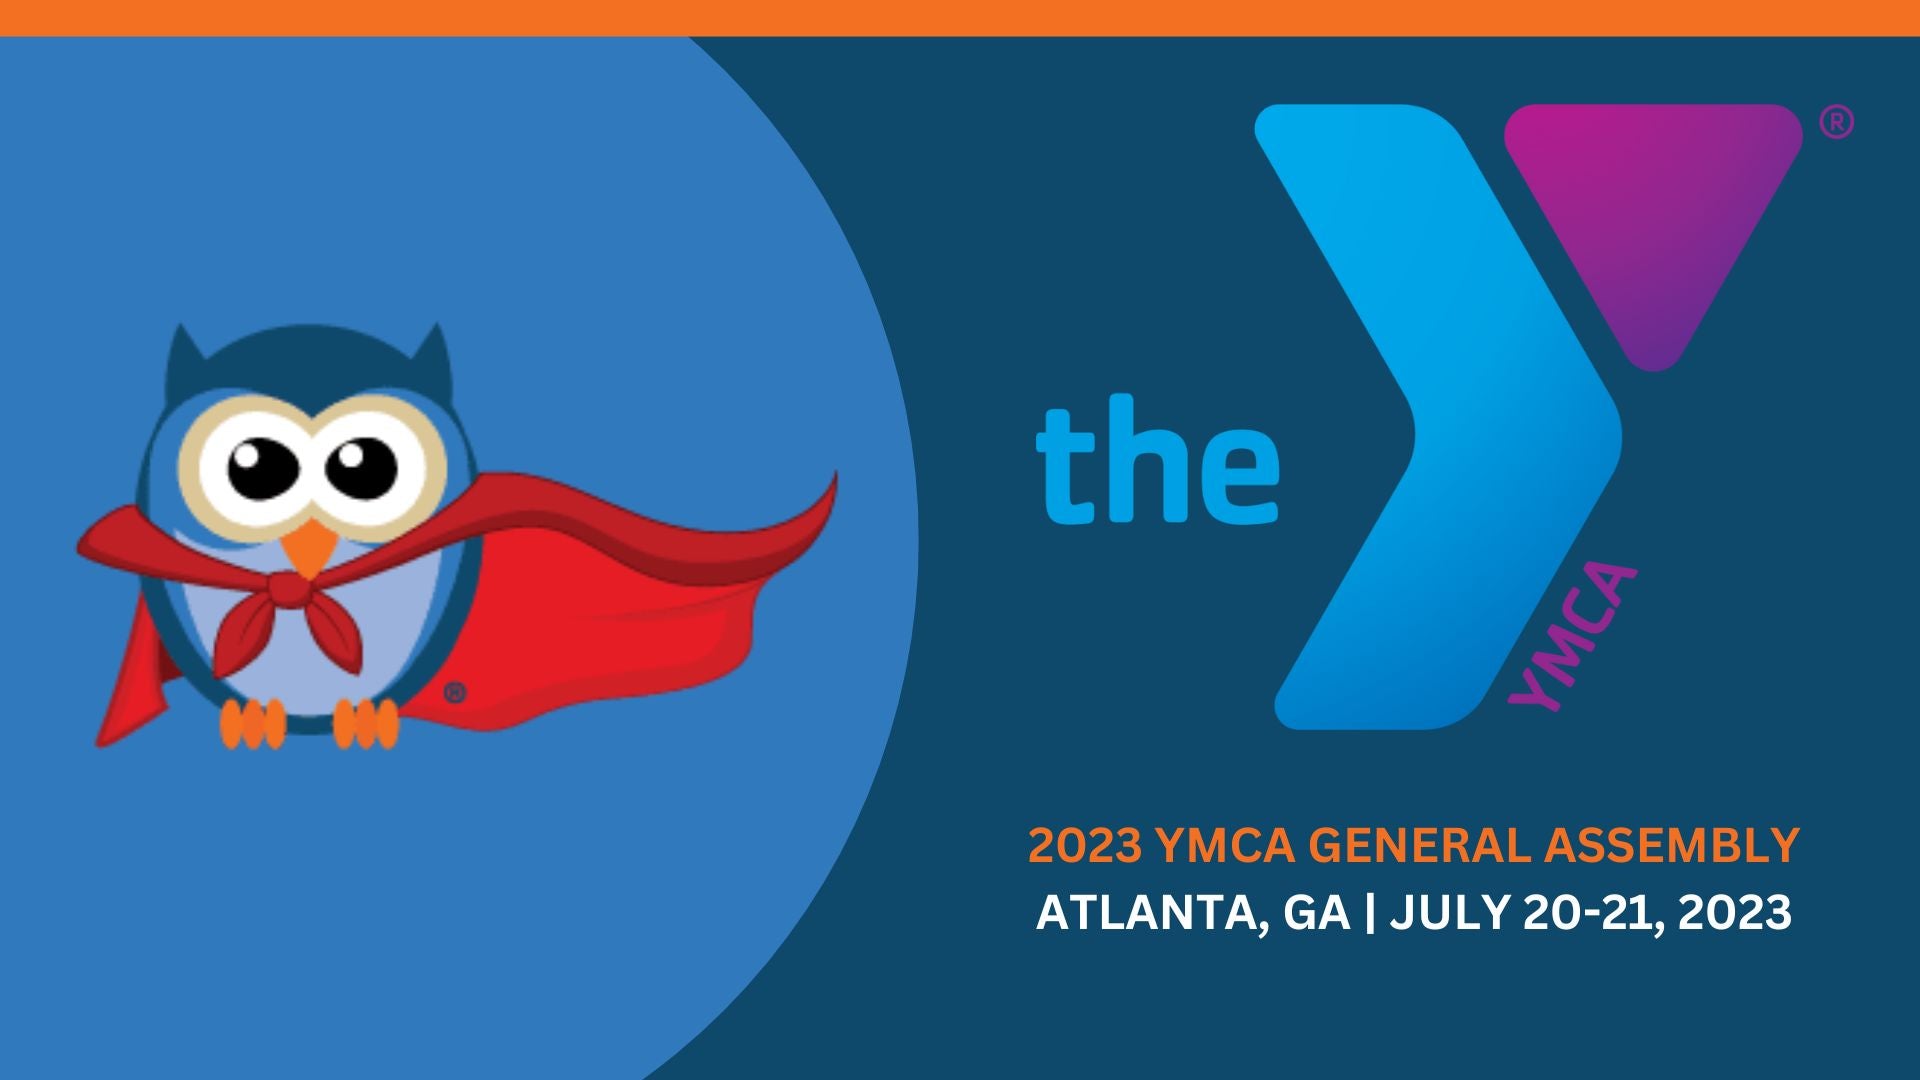 STEMfinity is in Atlanta this week for the 2023 YMCA General Assembly